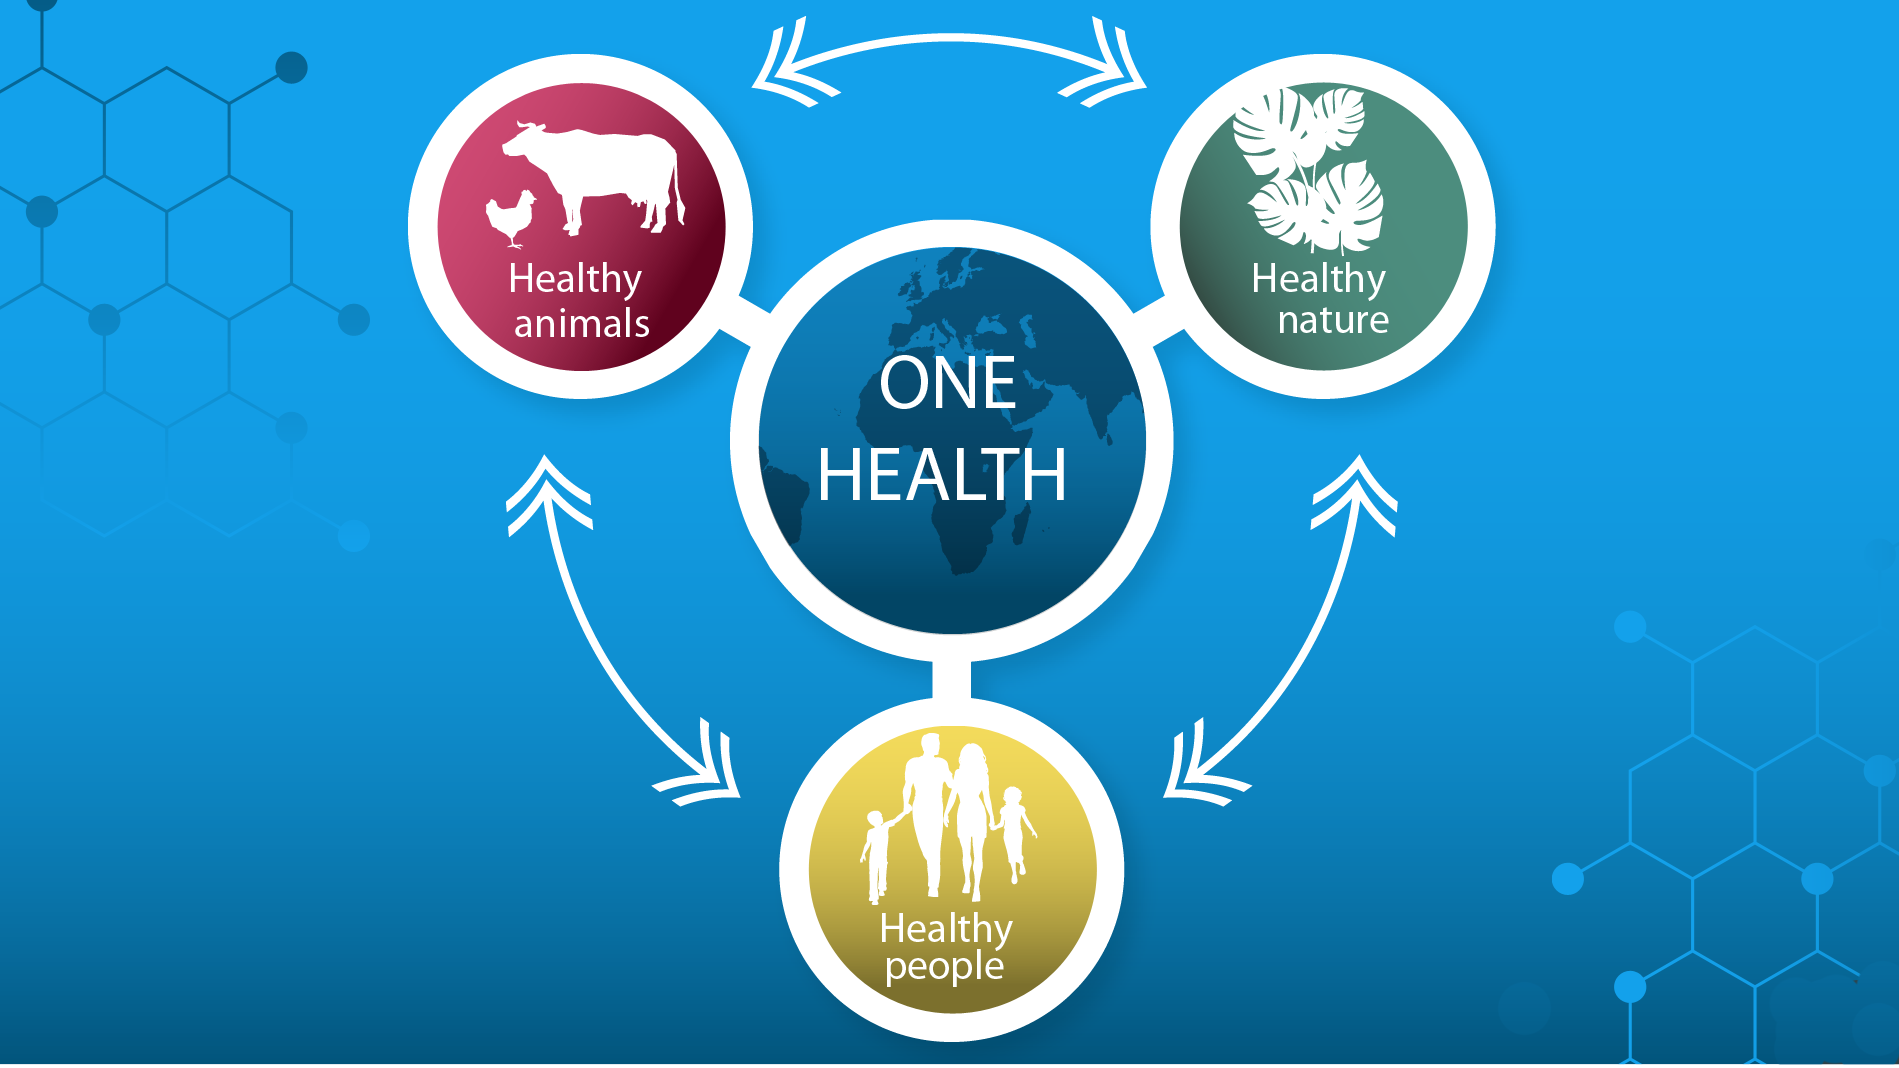 Graphic representation of the One Health approach: One Health is at the centre and there are interdependencies between human health, animal health and a healthy natural environment. 